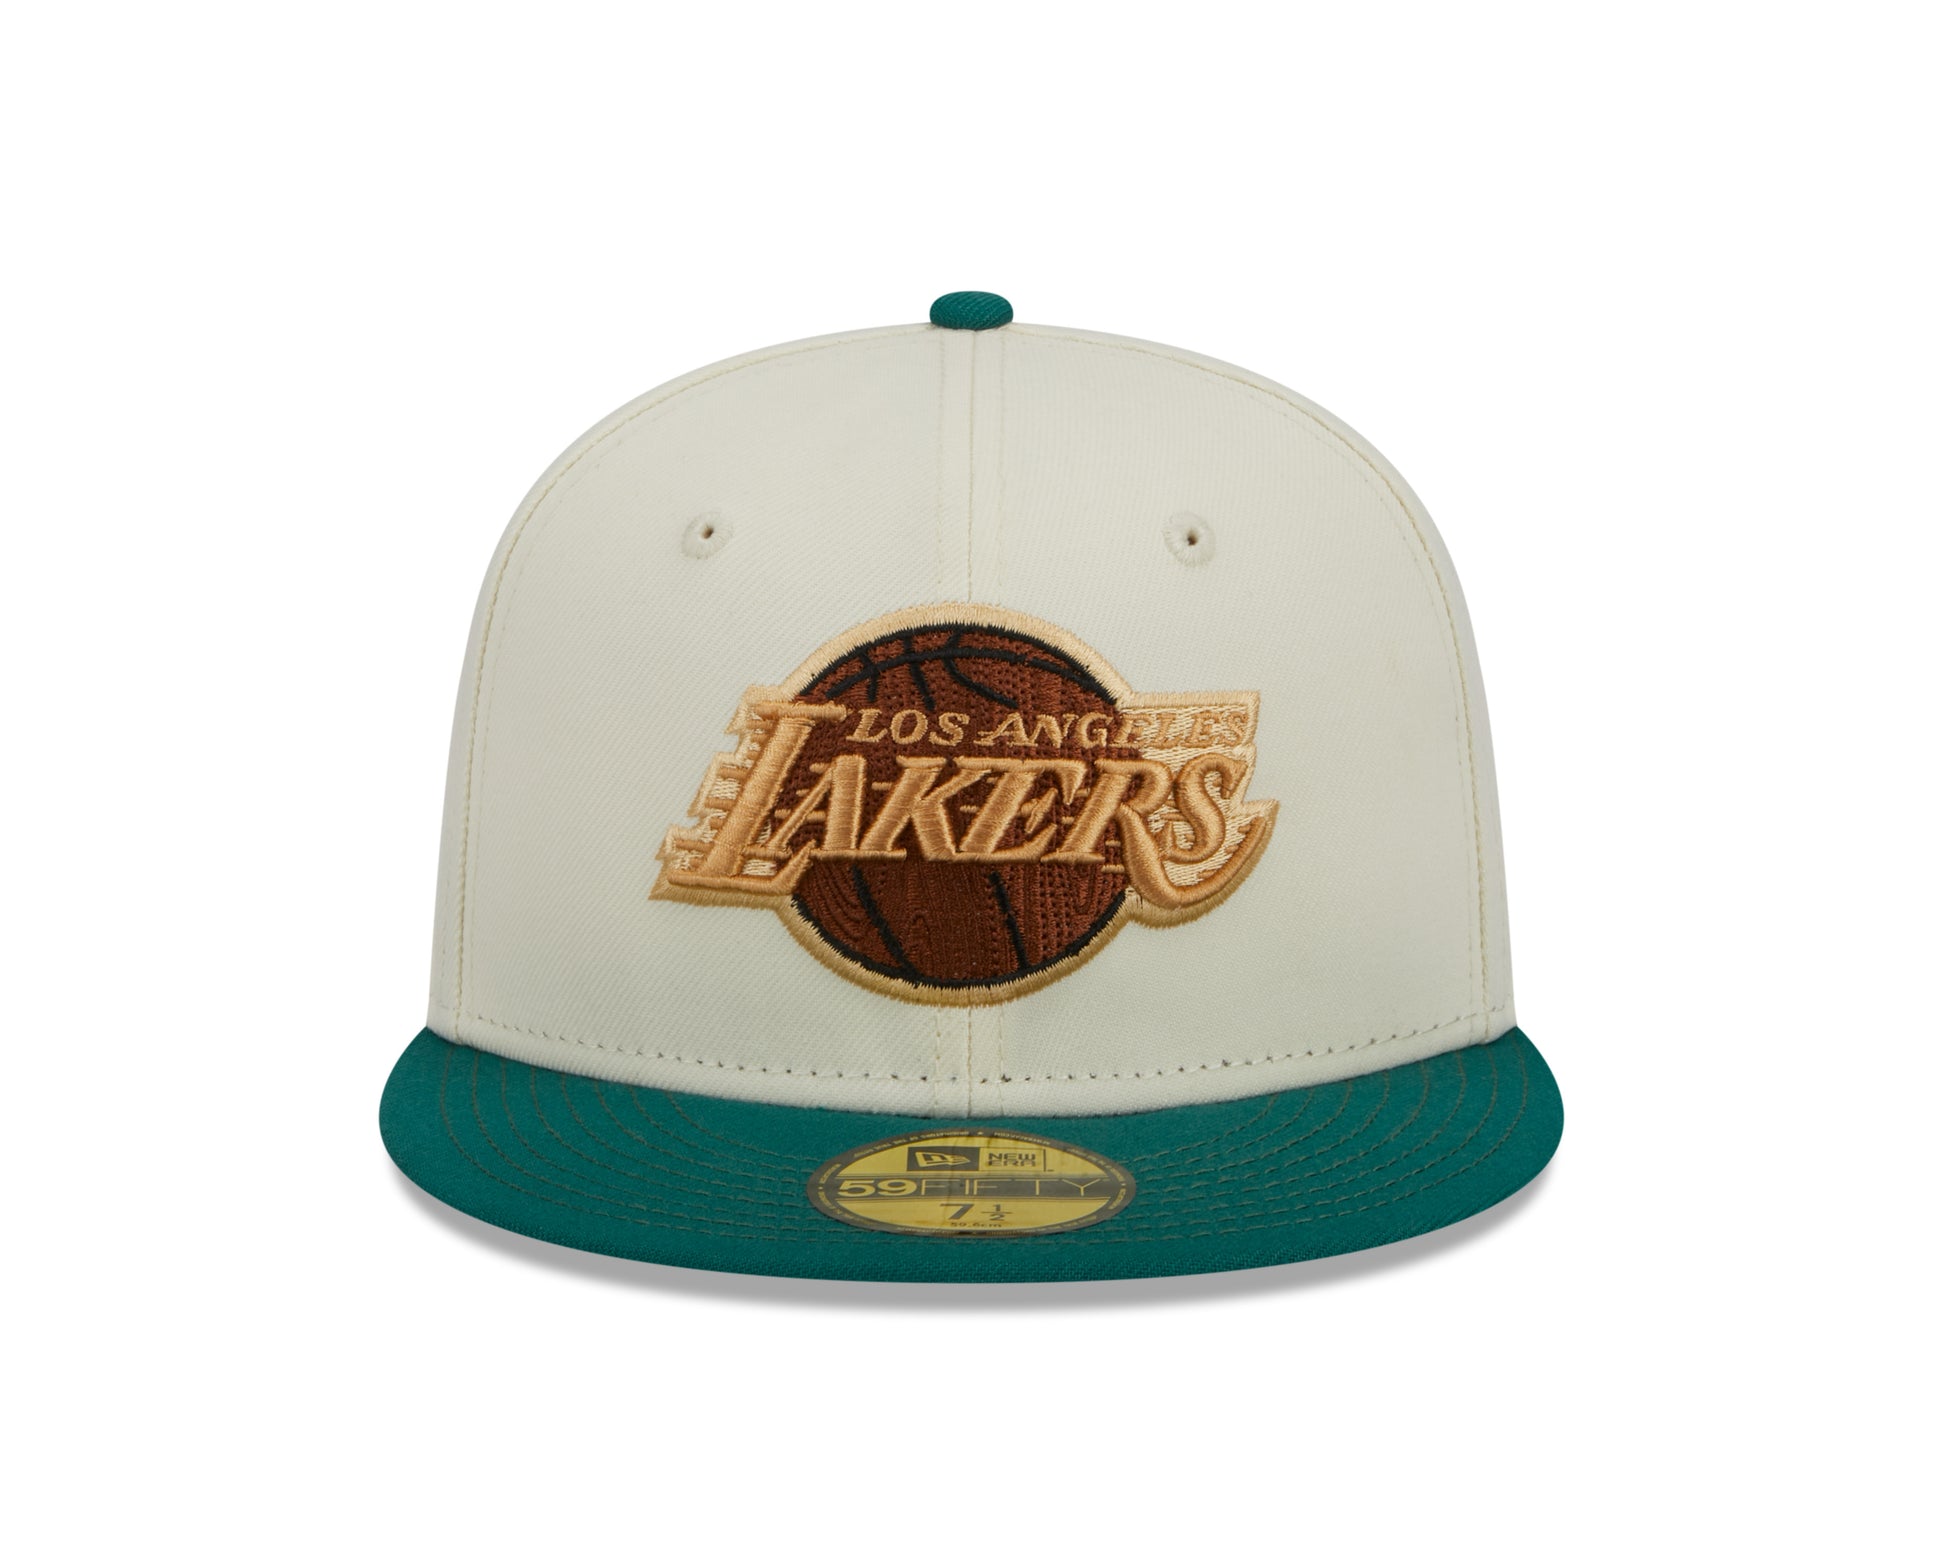 New Era - 59Fifty Fitted Cap - CAMP - Los Angeles Lakers - White/Green - Headz Up 